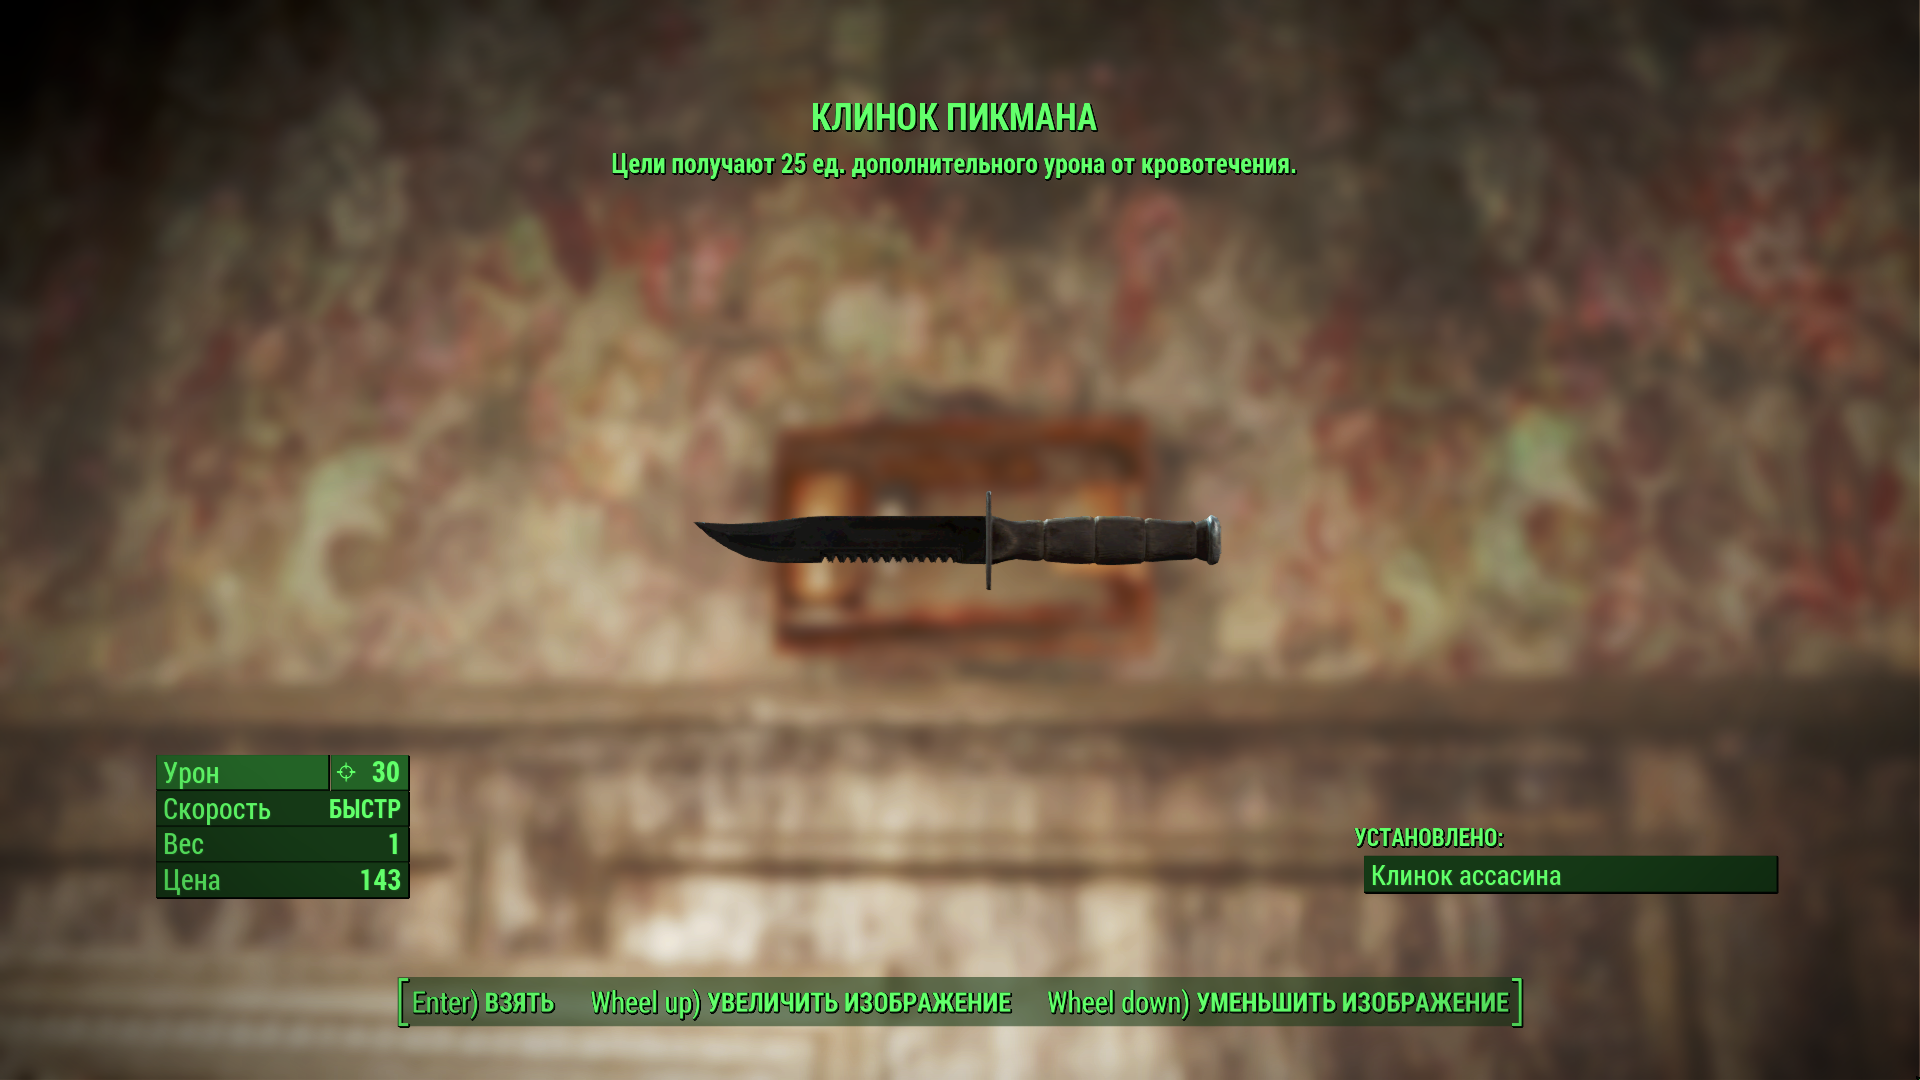 All legendary weapon fallout 4 фото 11